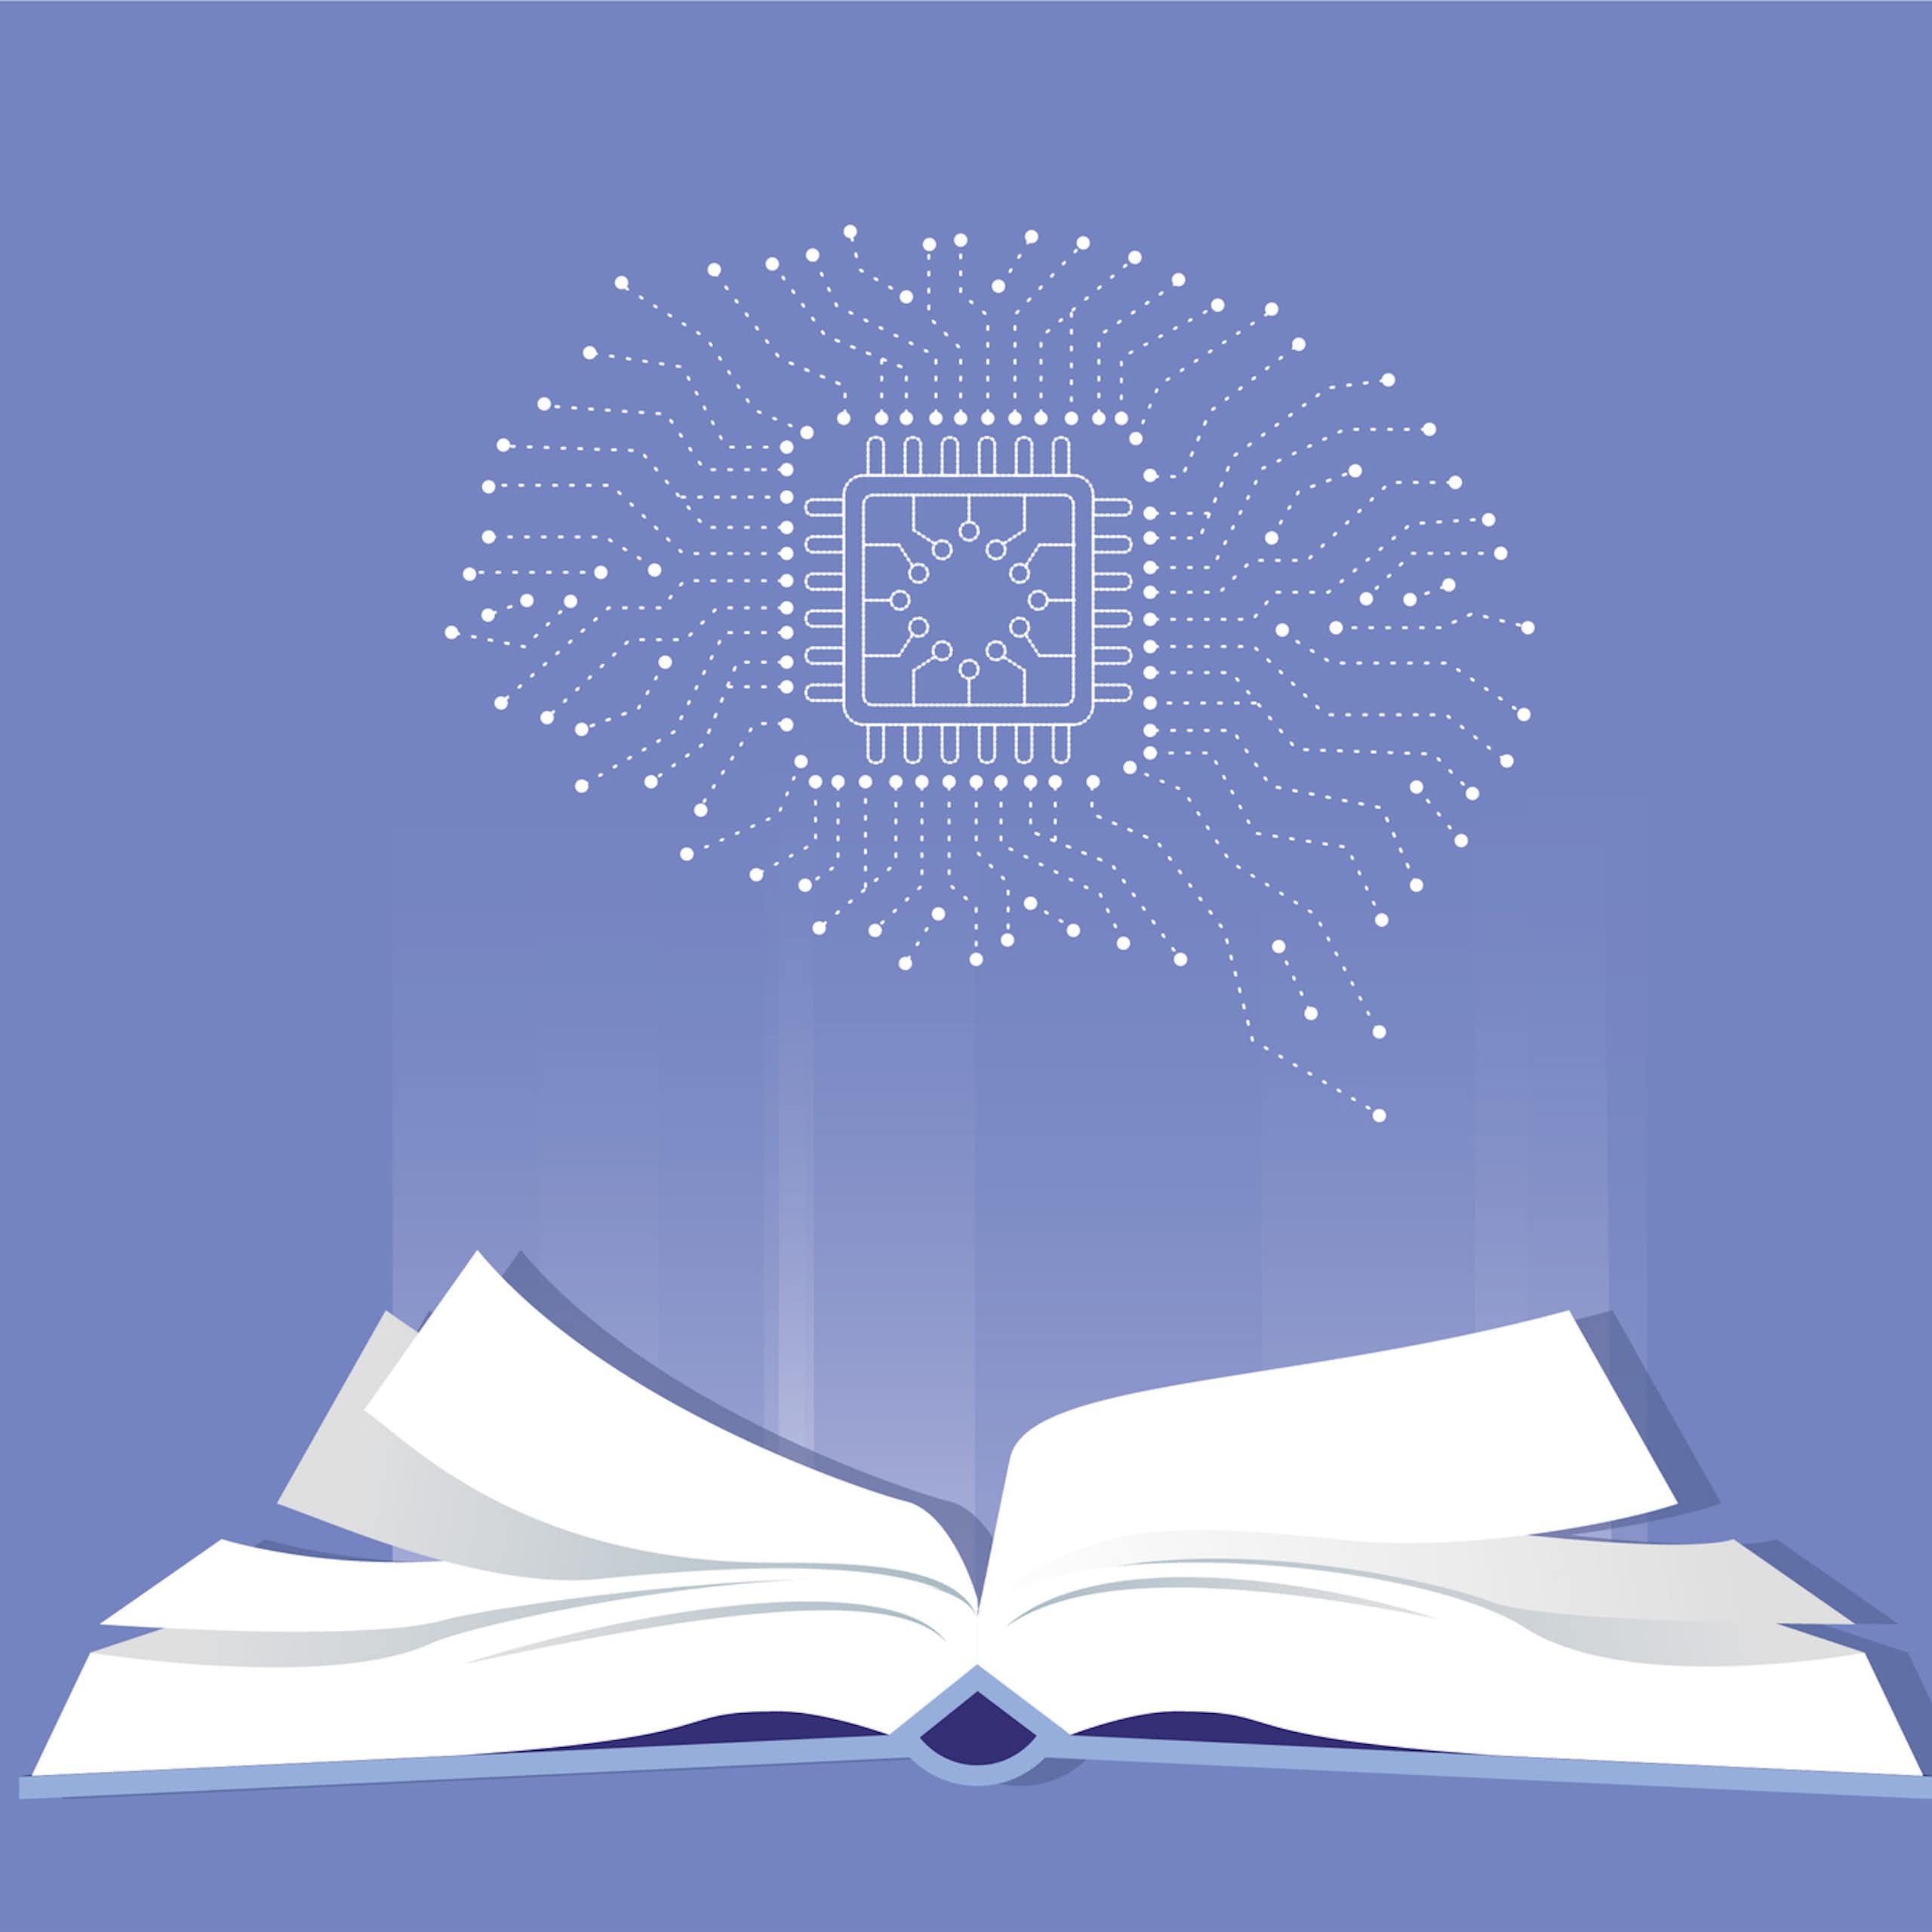 A dot diagram in the shape of a brain, with an open book beneath it, against a blue background.